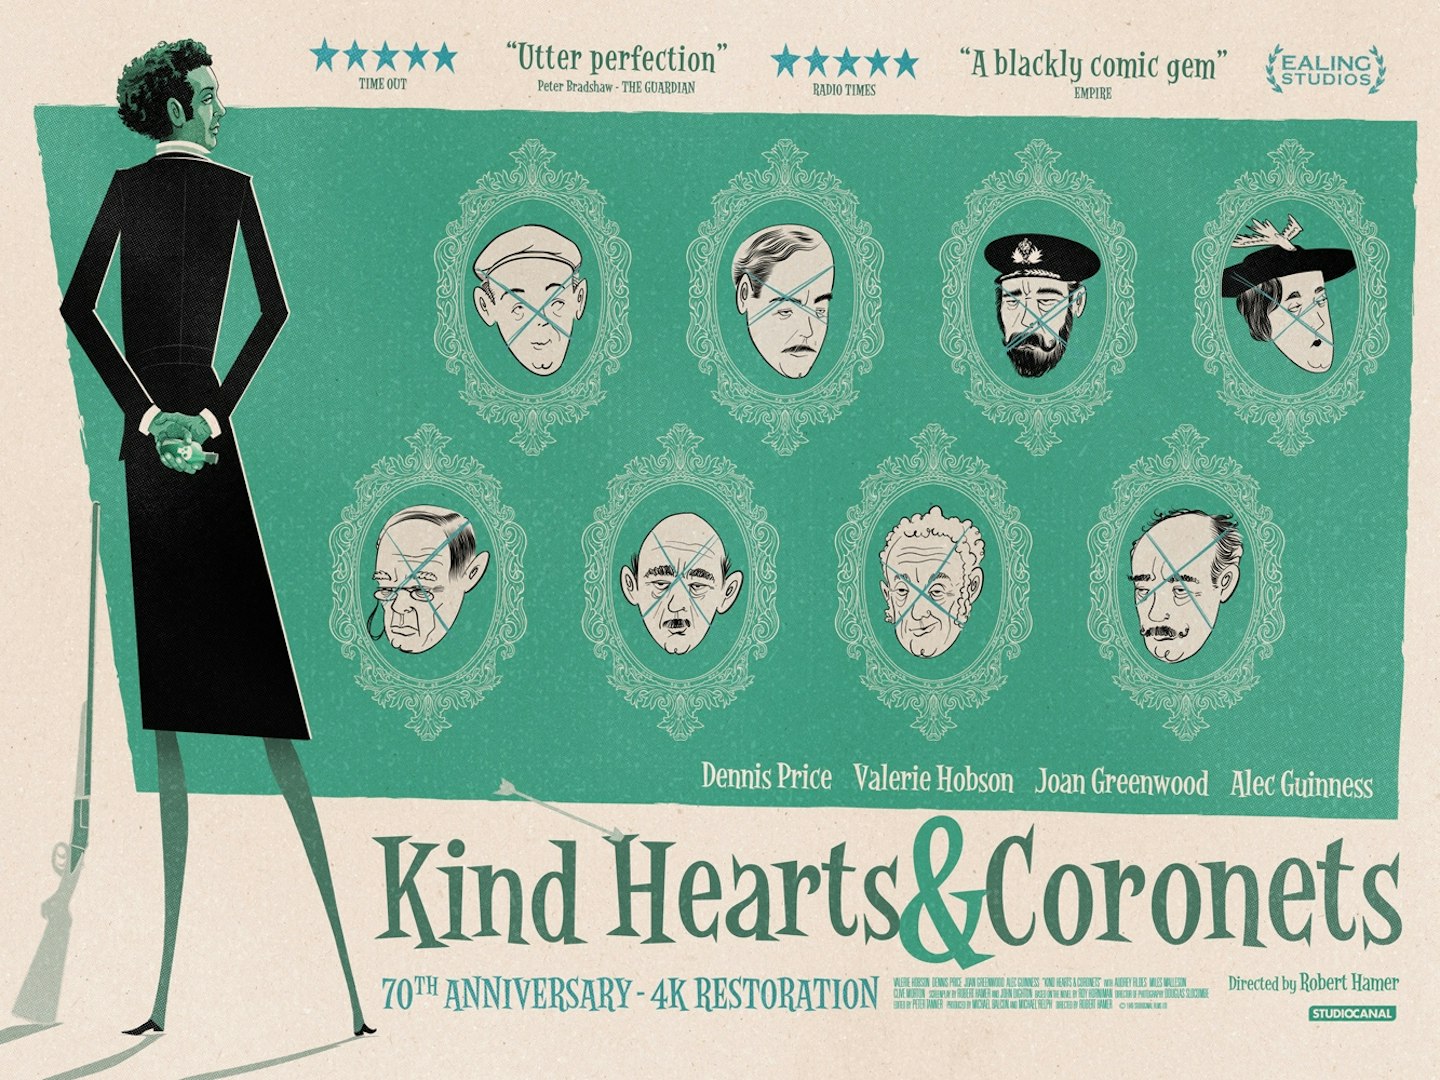 Kind Hearts And Coronets re-release